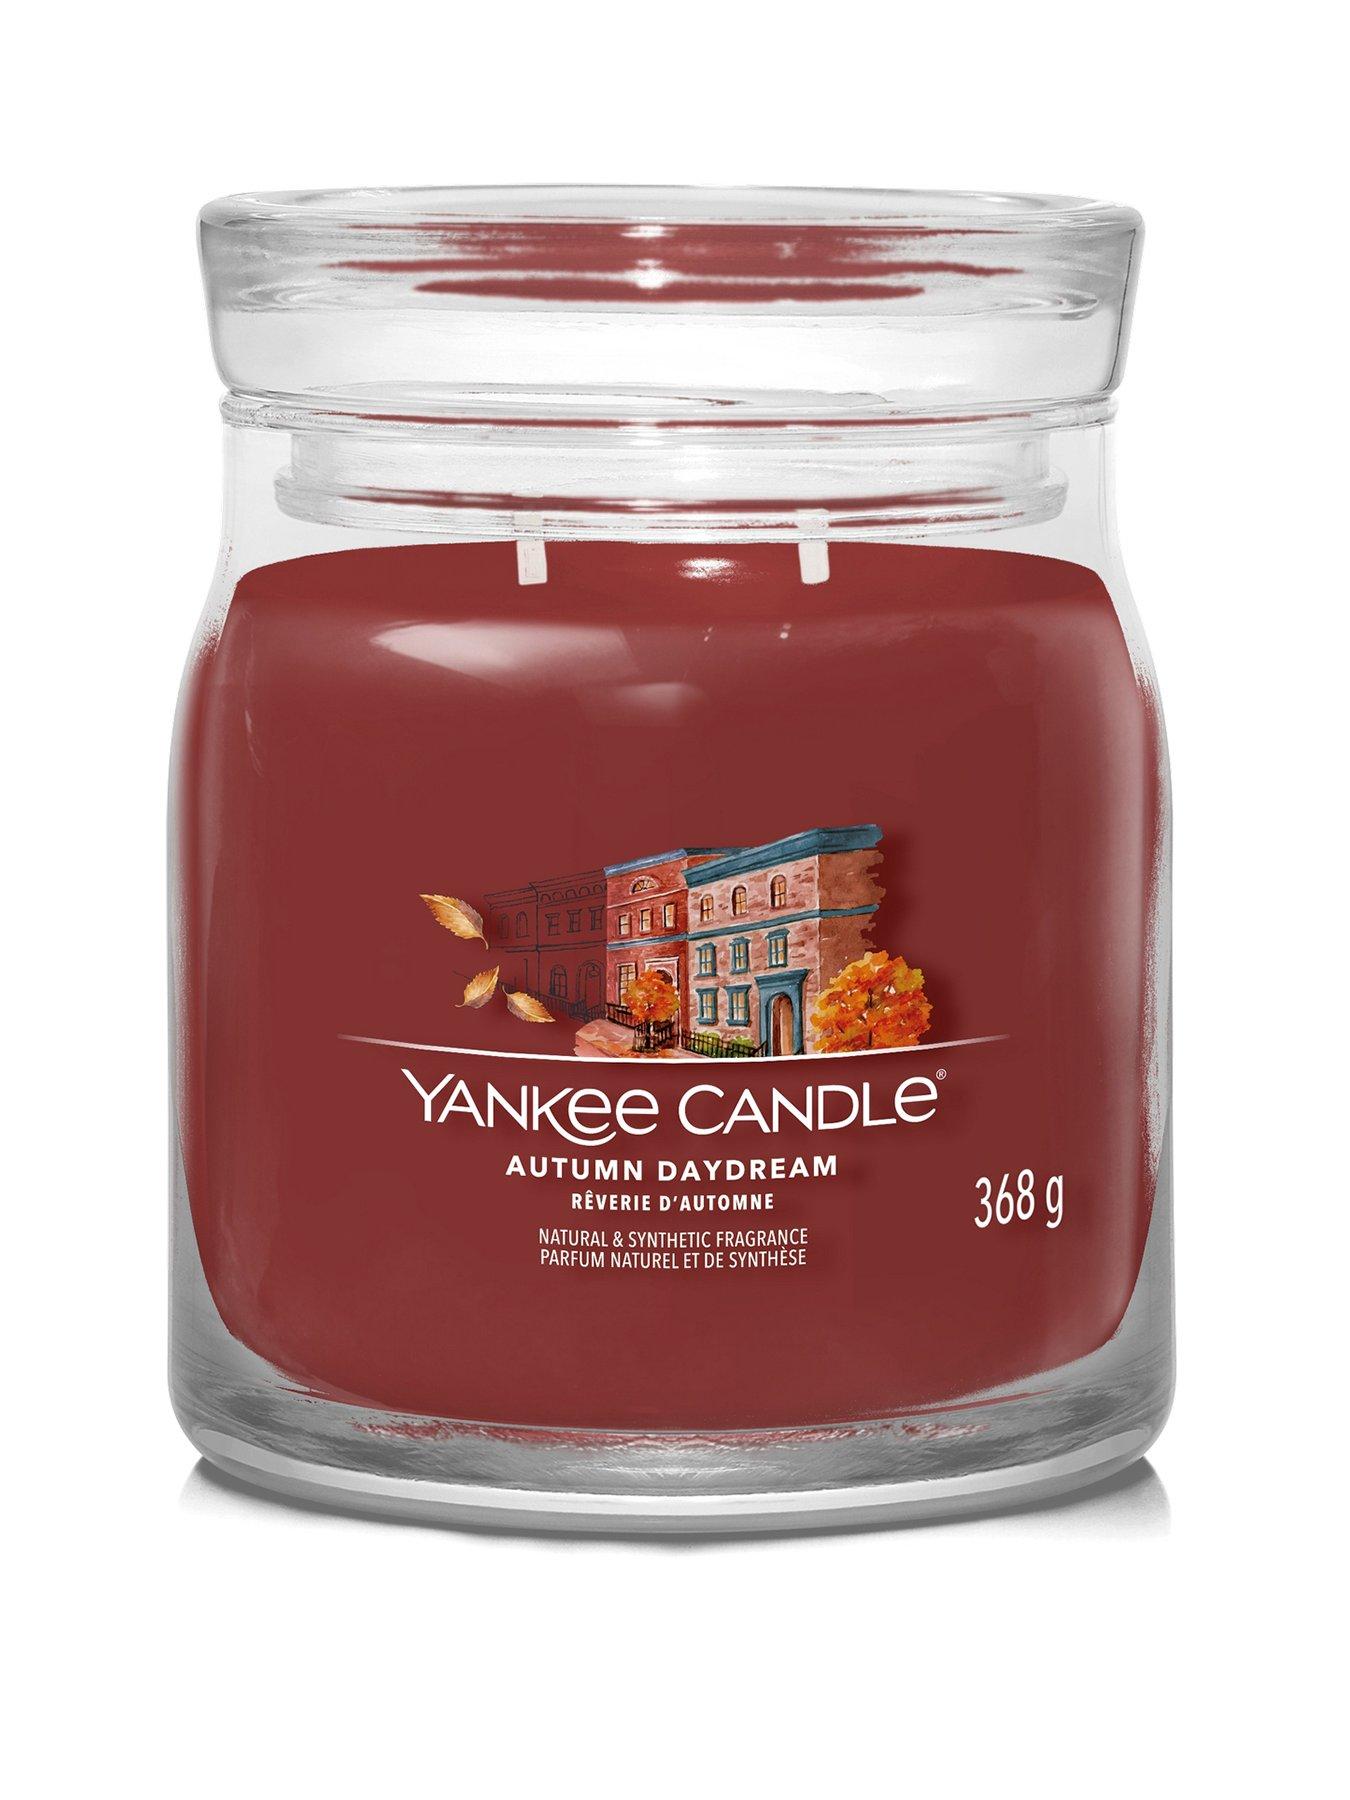 Yankee Candle Autumn sale - save up to 40% on large scented candles